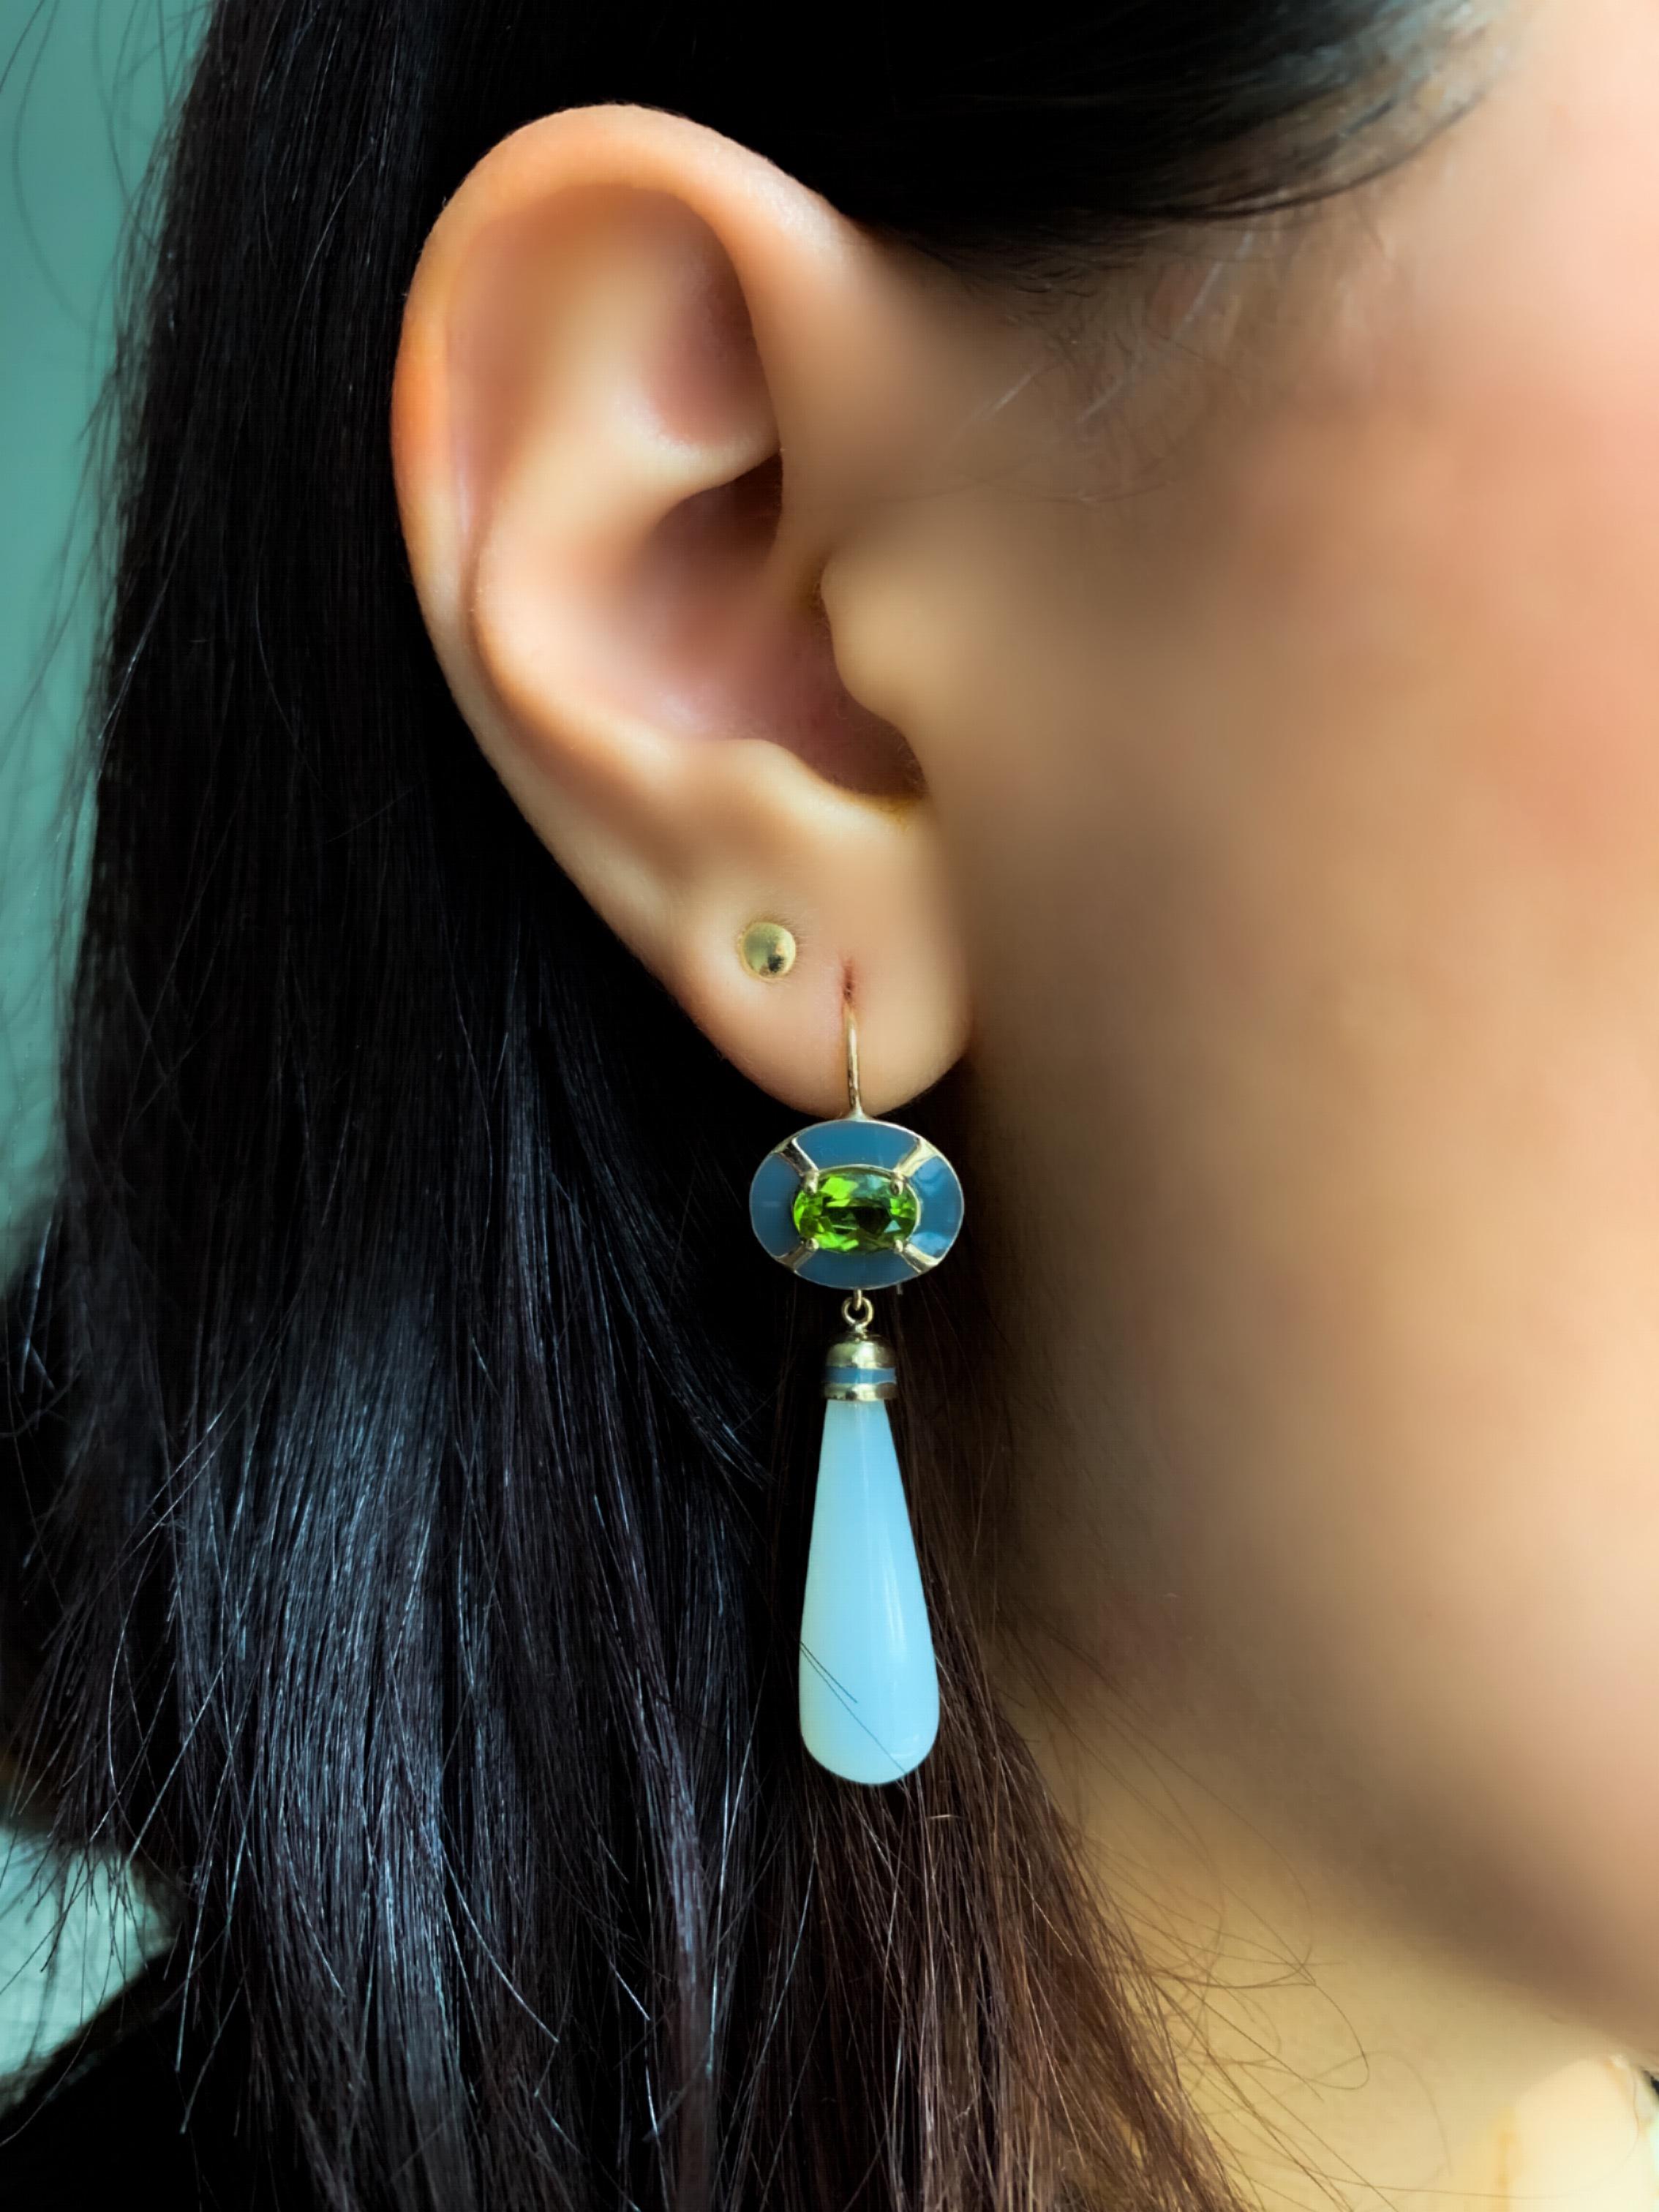 These colorful enamel earrings feature an oval Peridot surrounded by grey enamel.  The design around the peridot is reminiscent of the Art Nouveau period. The Moonstone drop is capped in gold with a stripe of grey enamel.  
Materials: 14 karat gold,